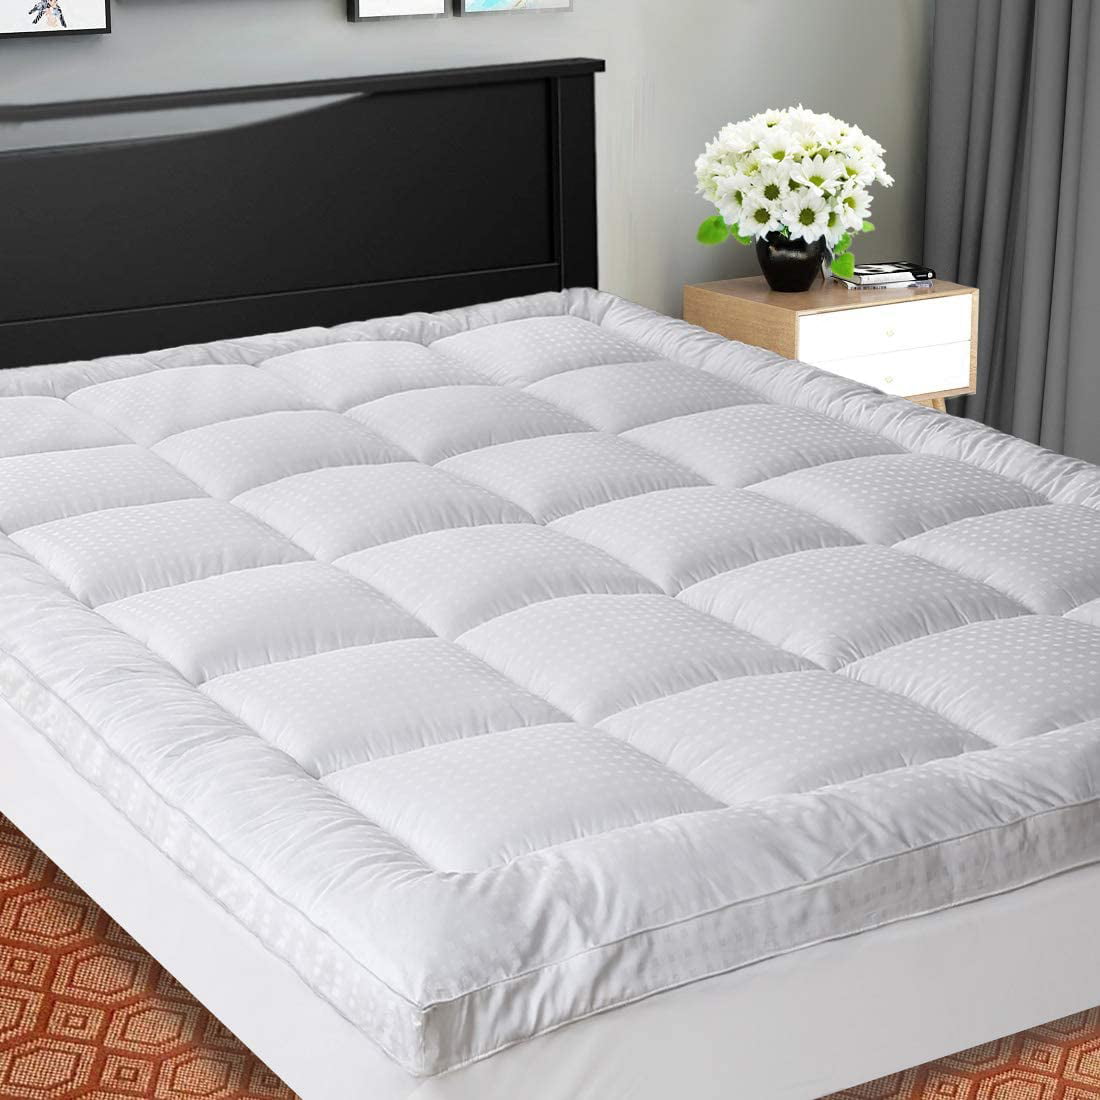 Details about   Luxury Overfilled Extra Thick Mattress Pad Cotton Pillow Top Topper Deep Pocket 